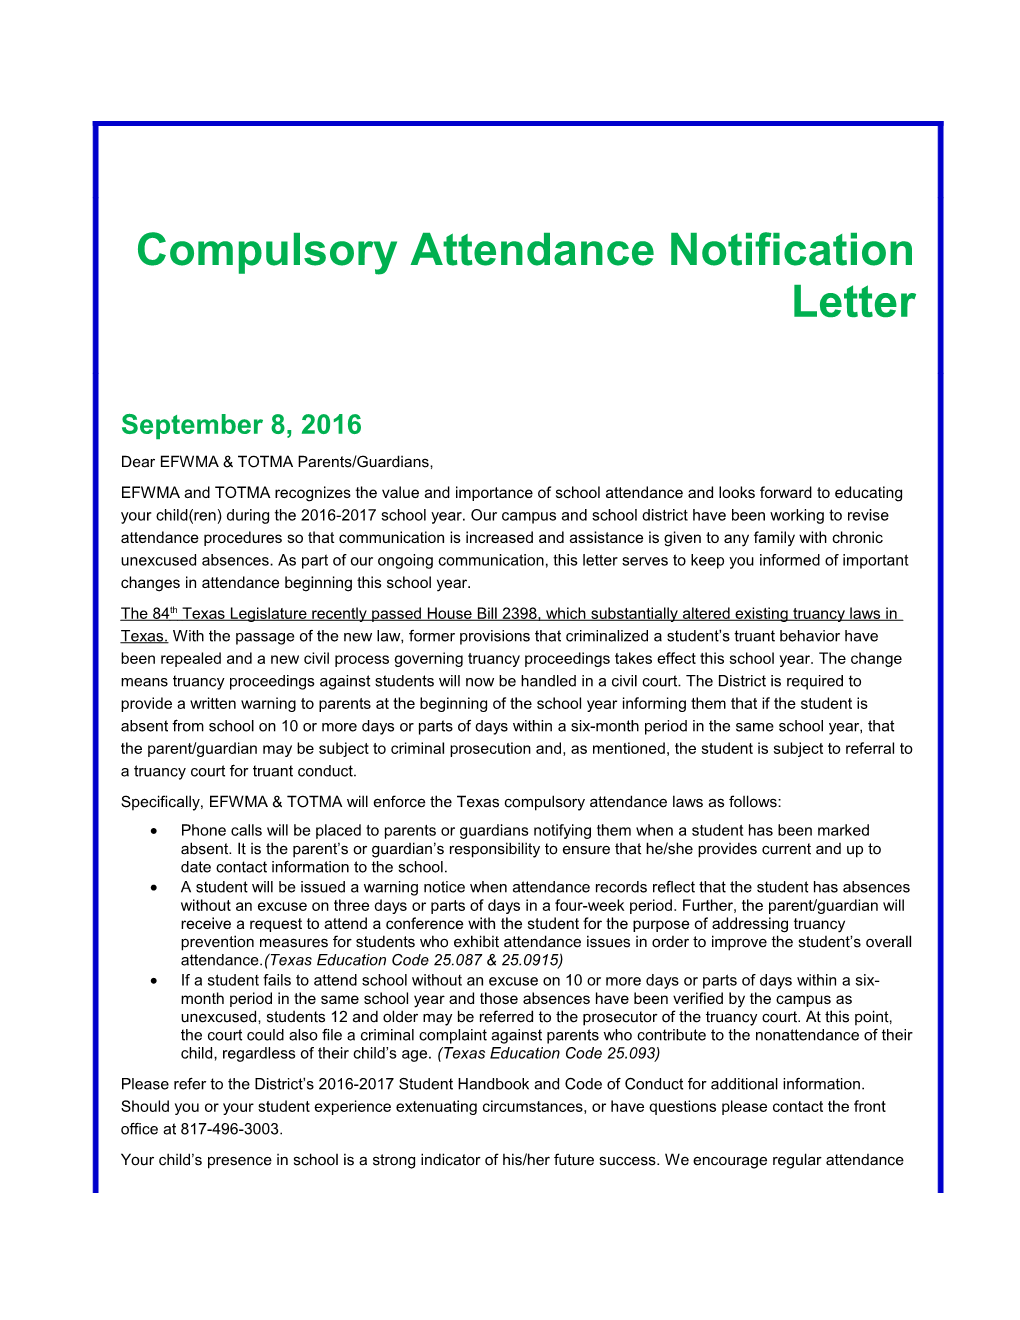 A Student Will Be Issued a Warning Notice When Attendance Records Reflect That the Student